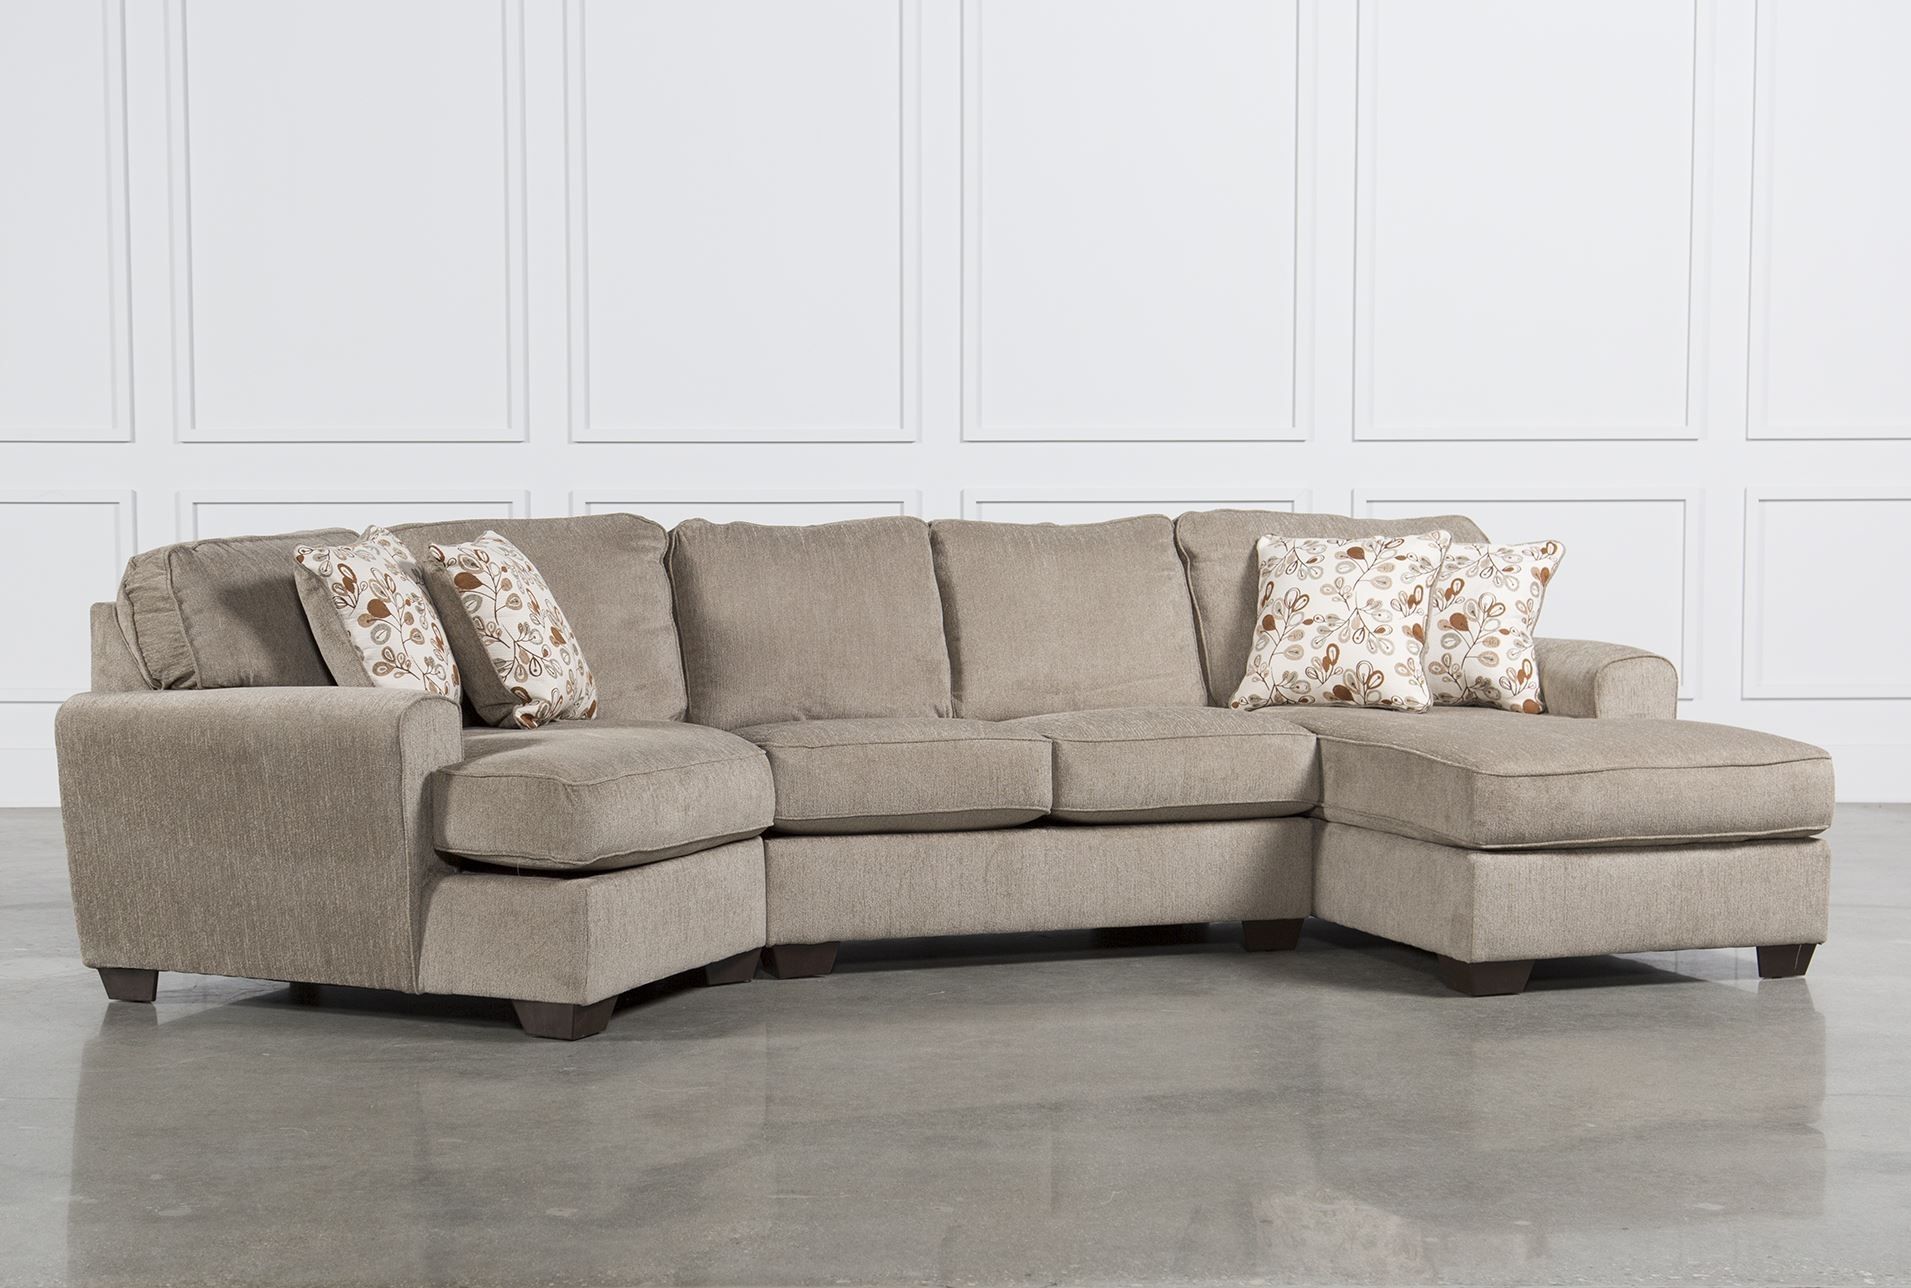 Furniture : Sectional Sofa Gta Sectional Couch El Paso Sectional With El Paso Sectional Sofas (View 3 of 10)